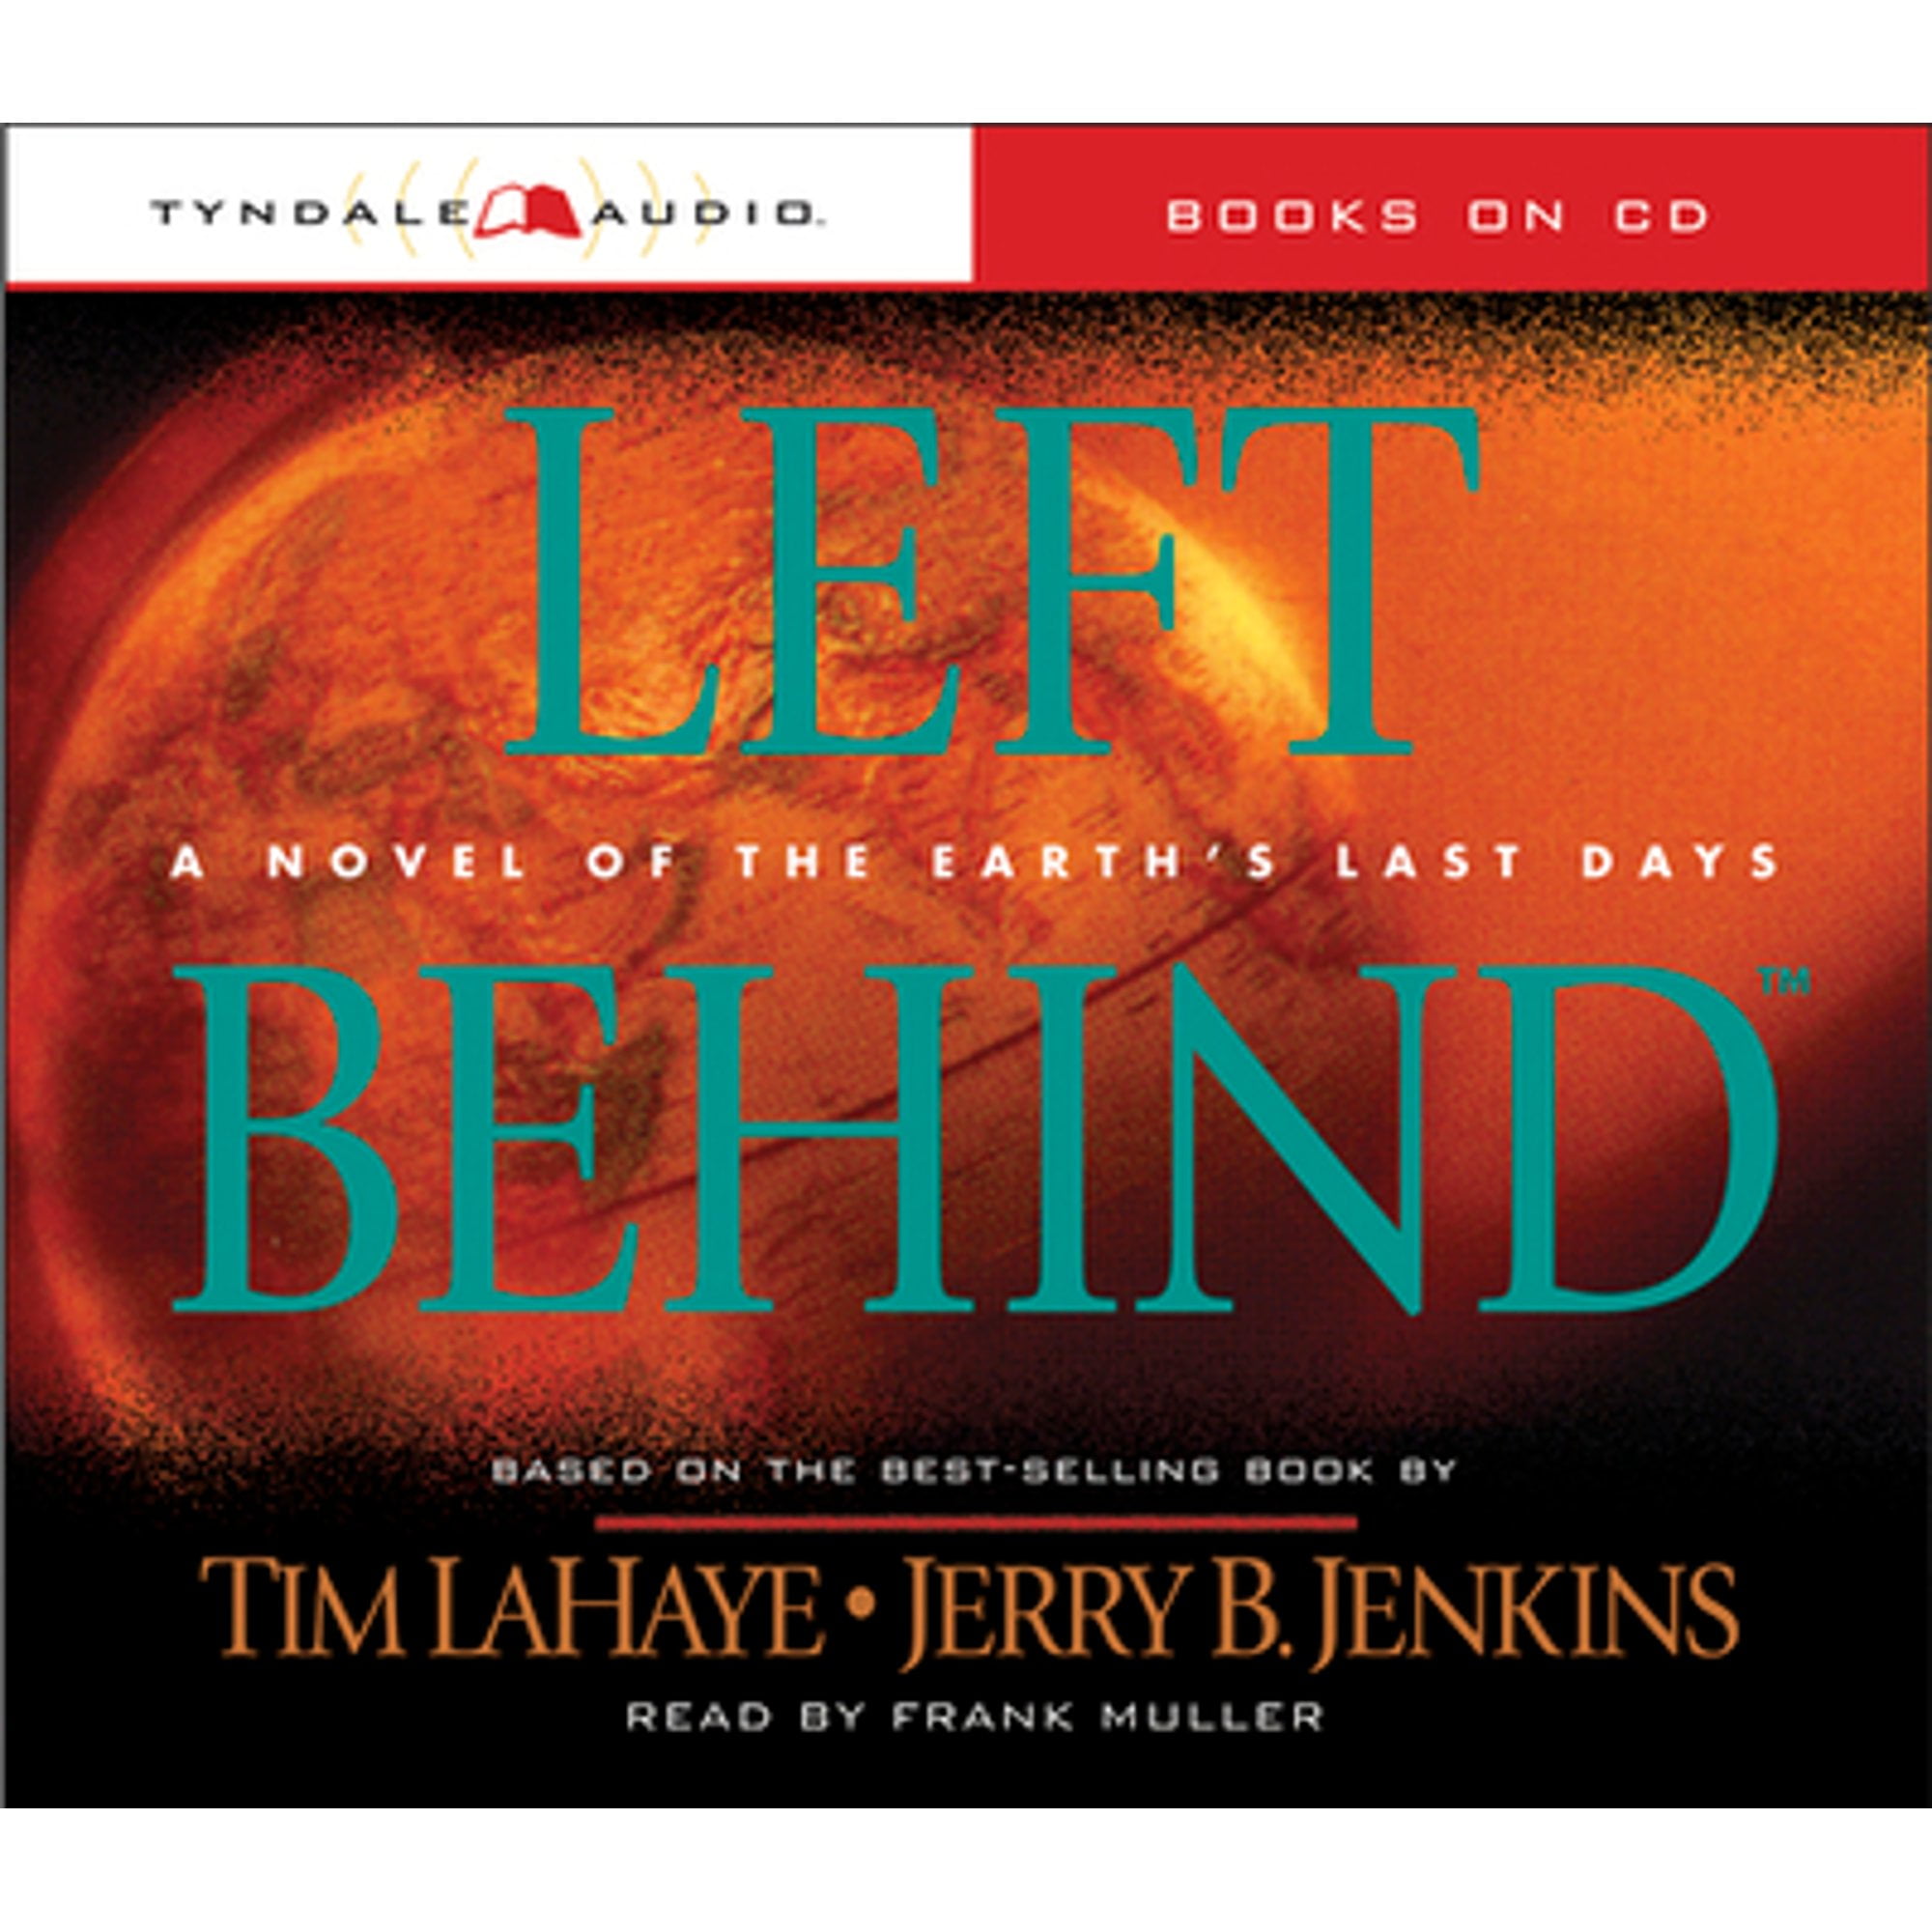 Behind: A Novel of the Earth's Last Days (Pre-Owned Audiobook 9780842343237) by Dr. Tim LaHaye, Jerry B Jenkins, Frank Muller - Walmart.com